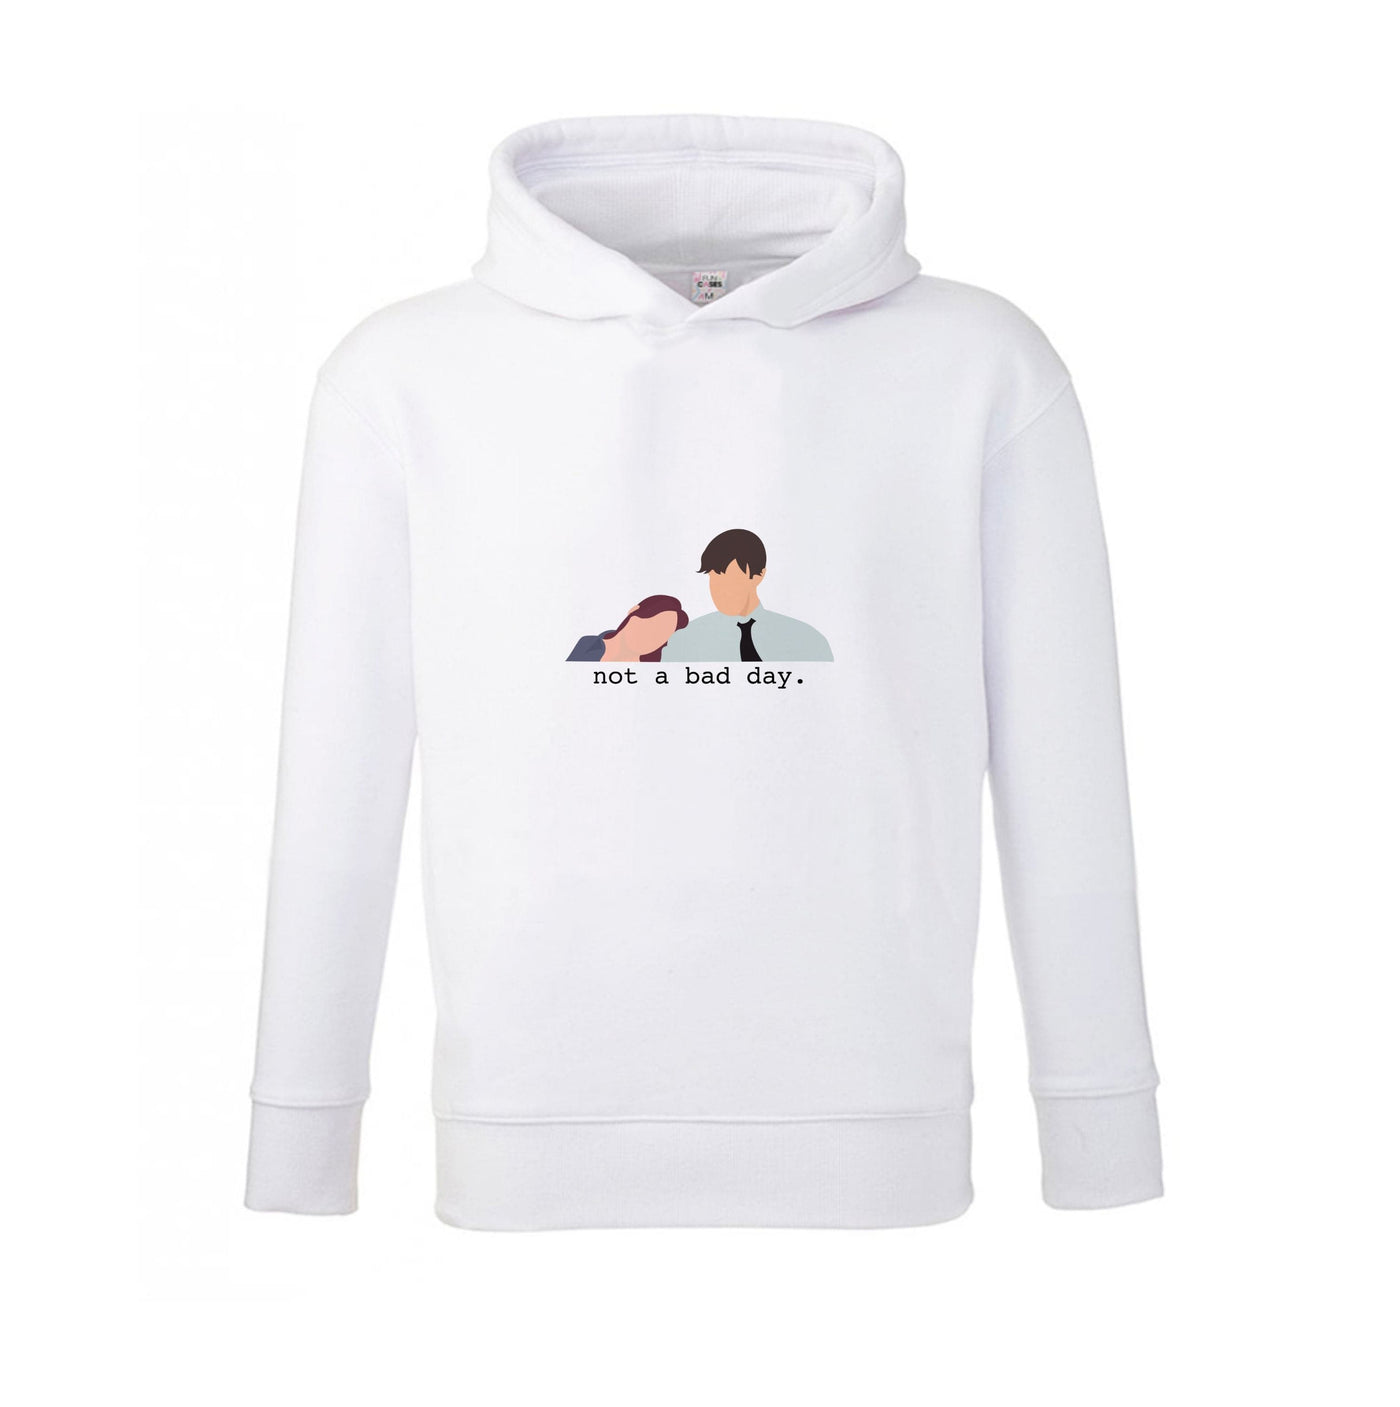 Not A Bad Day - The Office Kids Hoodie